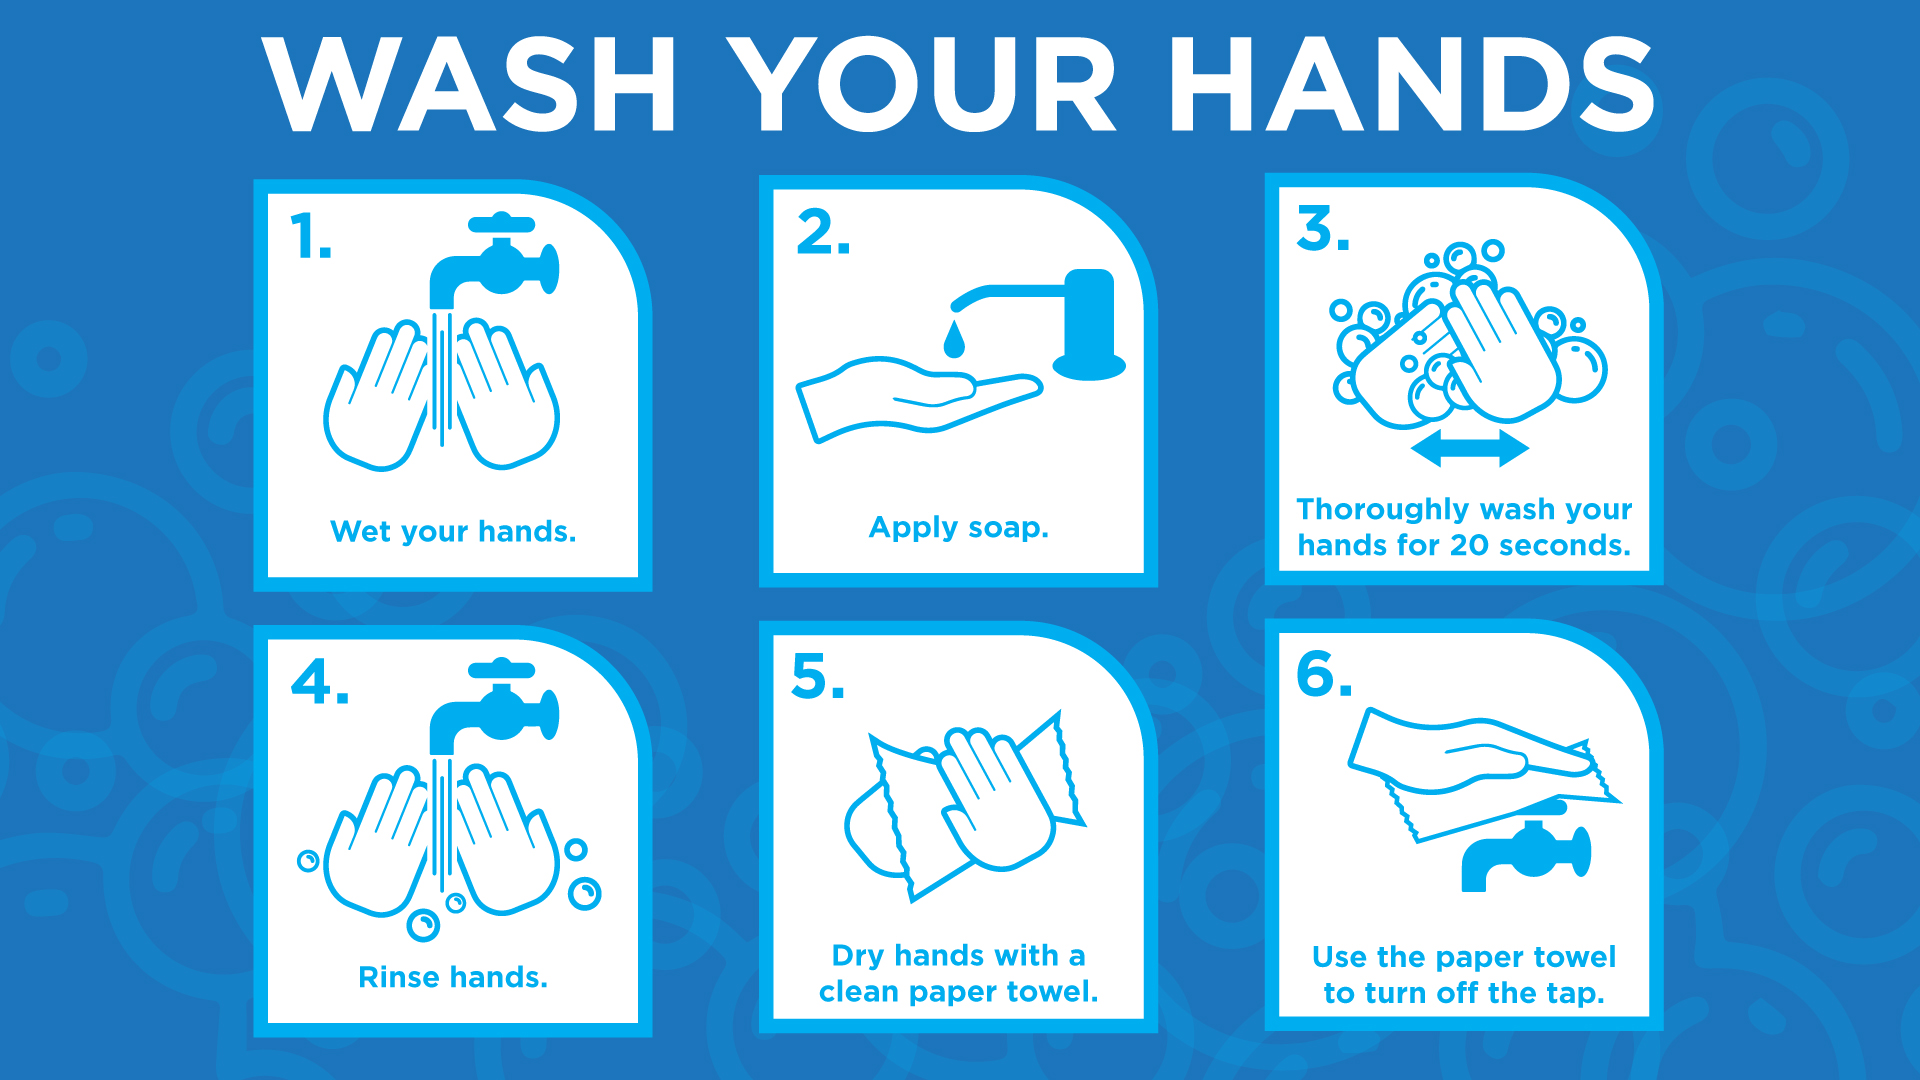 5 Pack - Wash Hands Poster 24"x12", Printed on Poster Paper (inside)